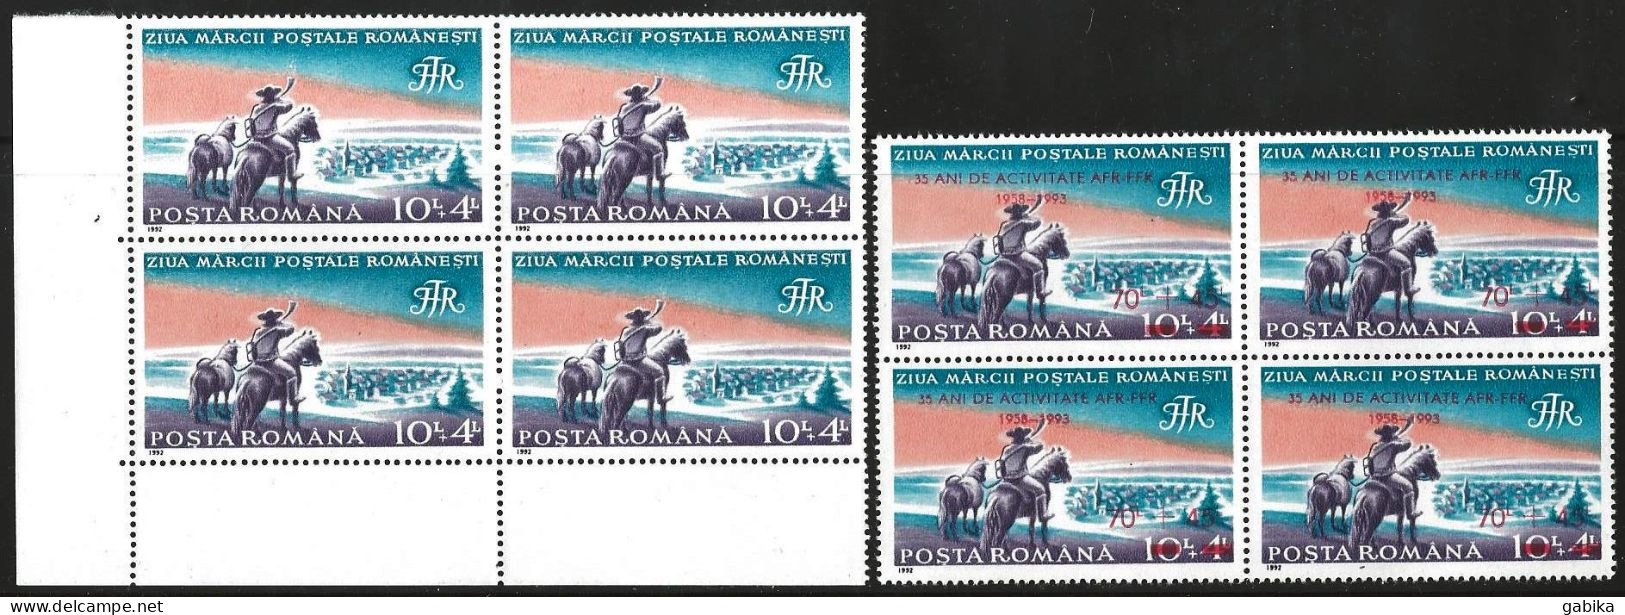 Romania 1992 1993, Scott B458 B460, MNH, Block Of Four, Without And With Overprint, Stamp Day AFR - Ungebraucht